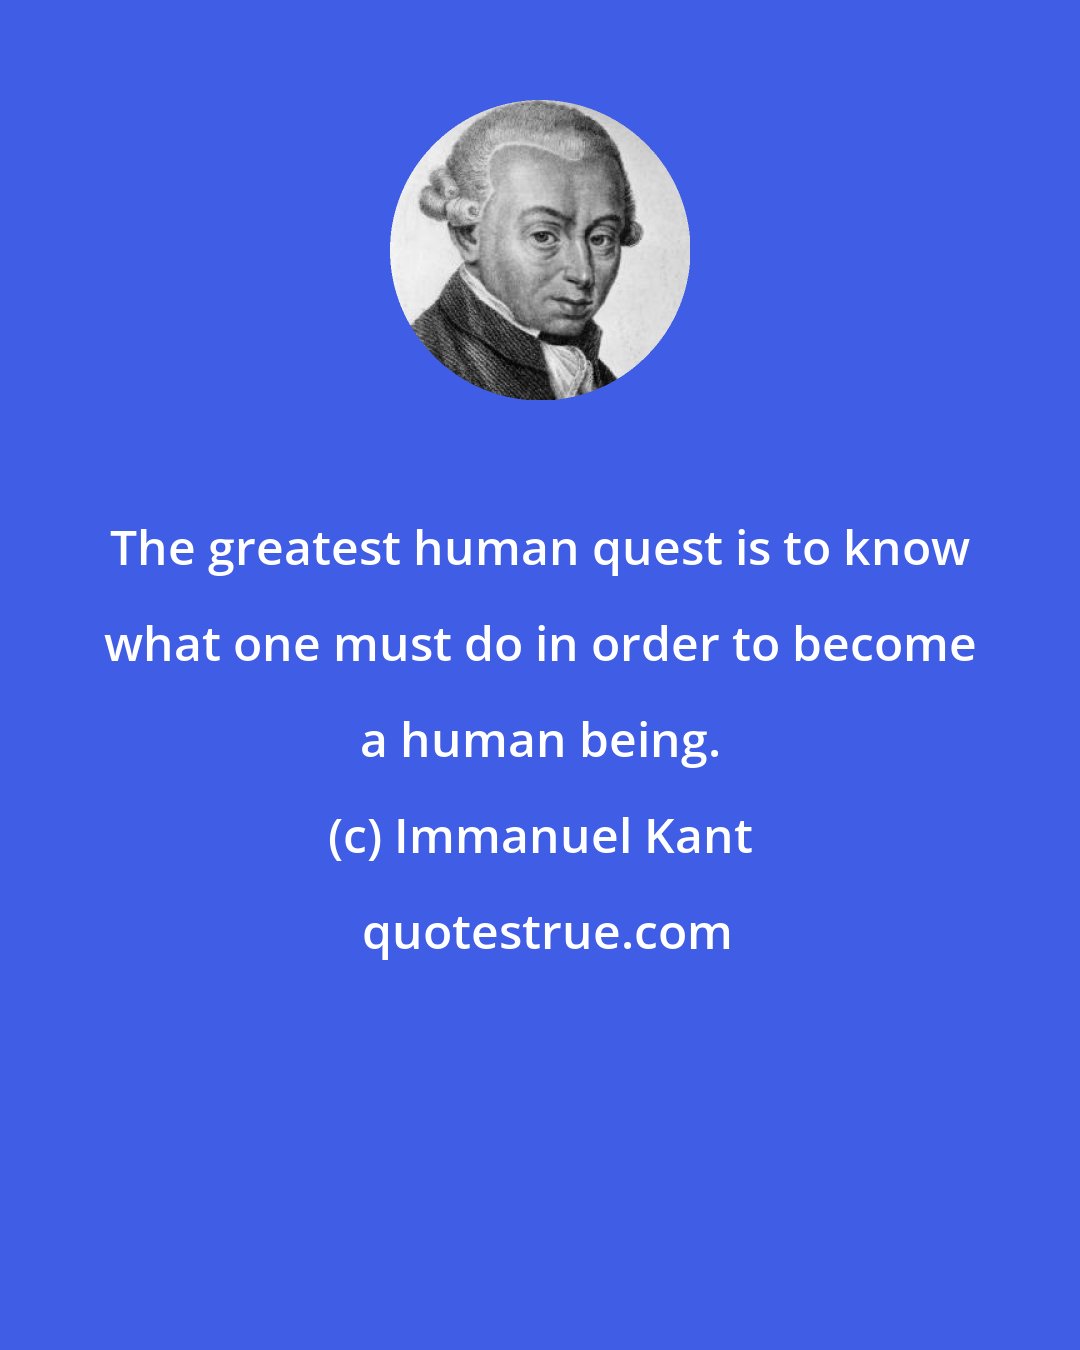 Immanuel Kant: The greatest human quest is to know what one must do in order to become a human being.